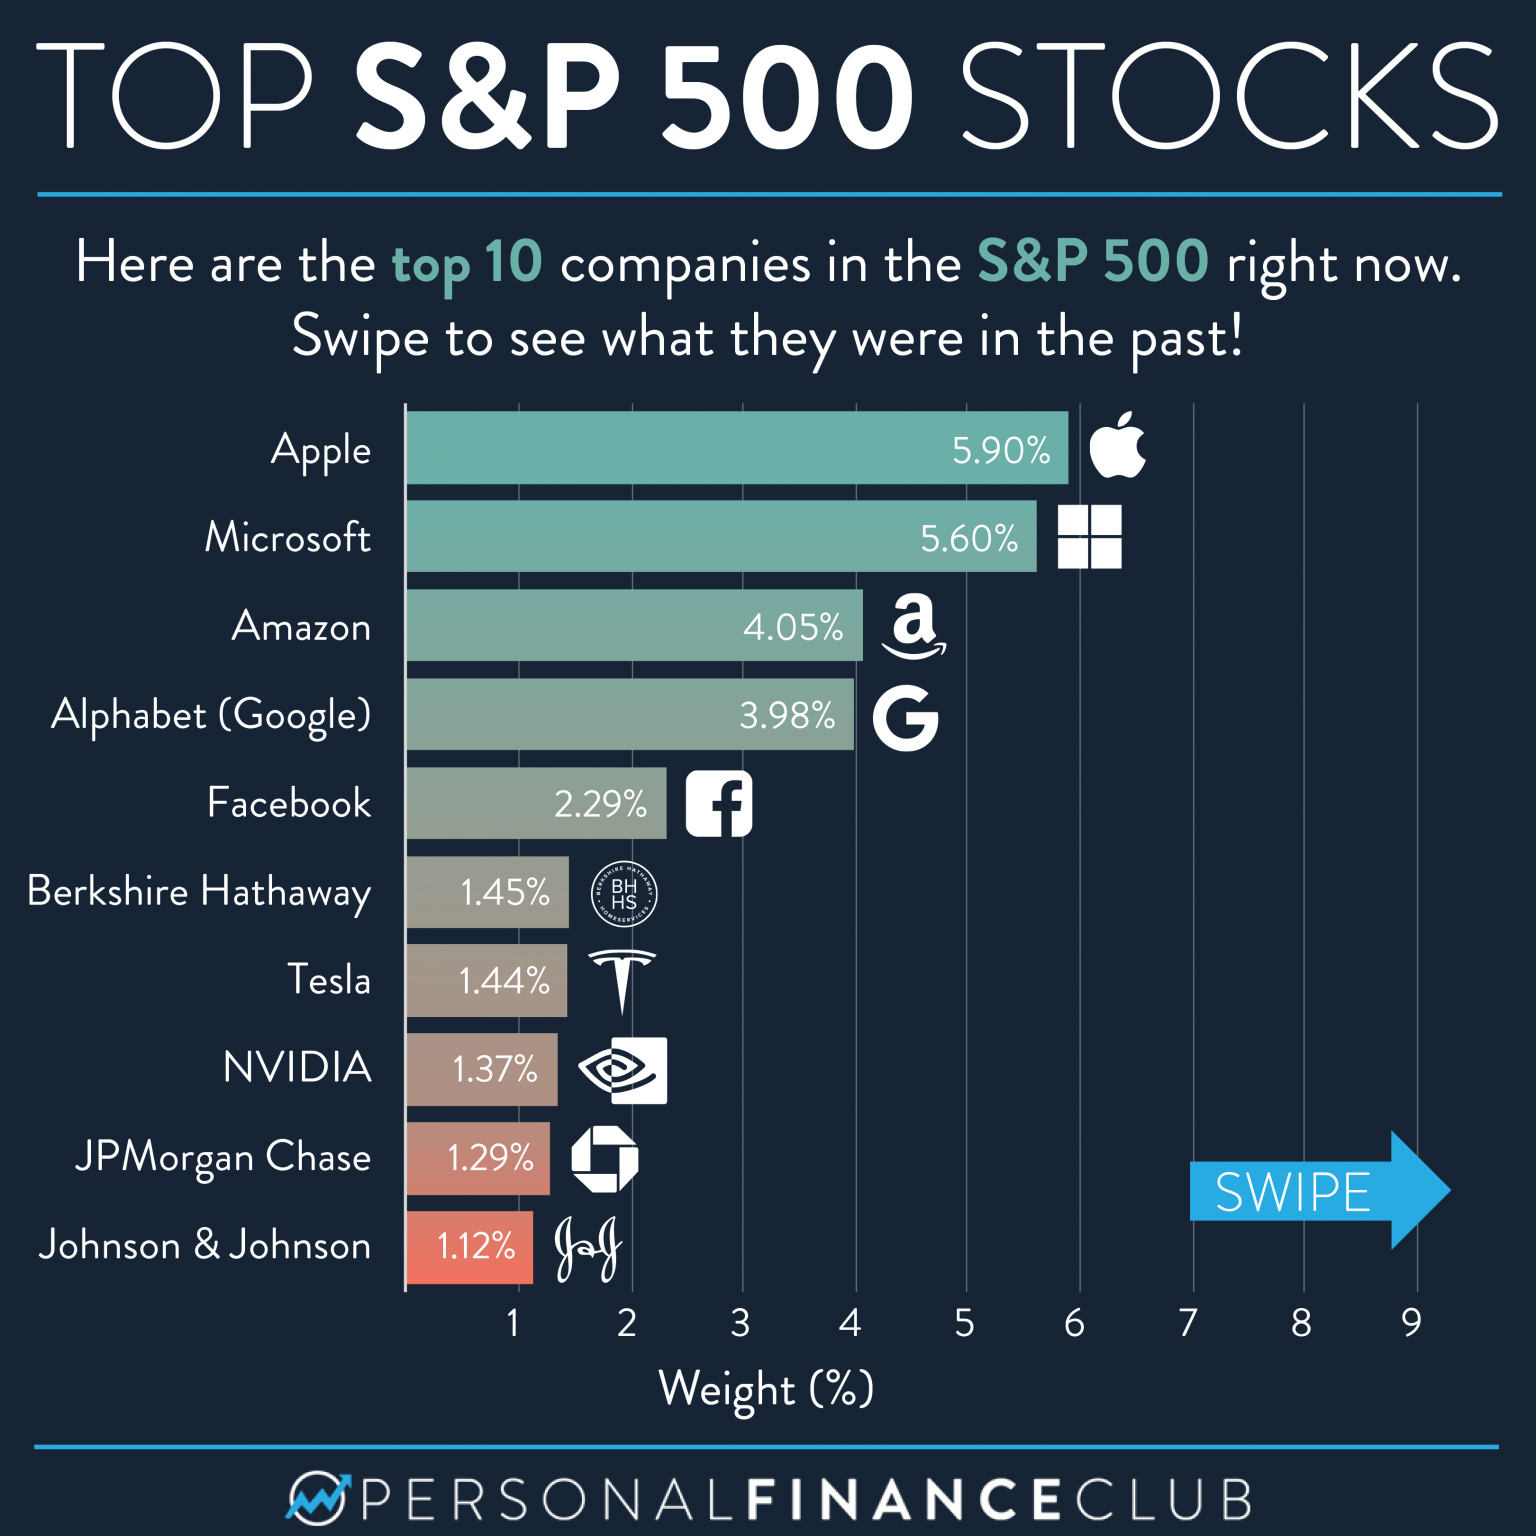 Here’s how the top 10 S&P 500 stocks have changed over the last 50